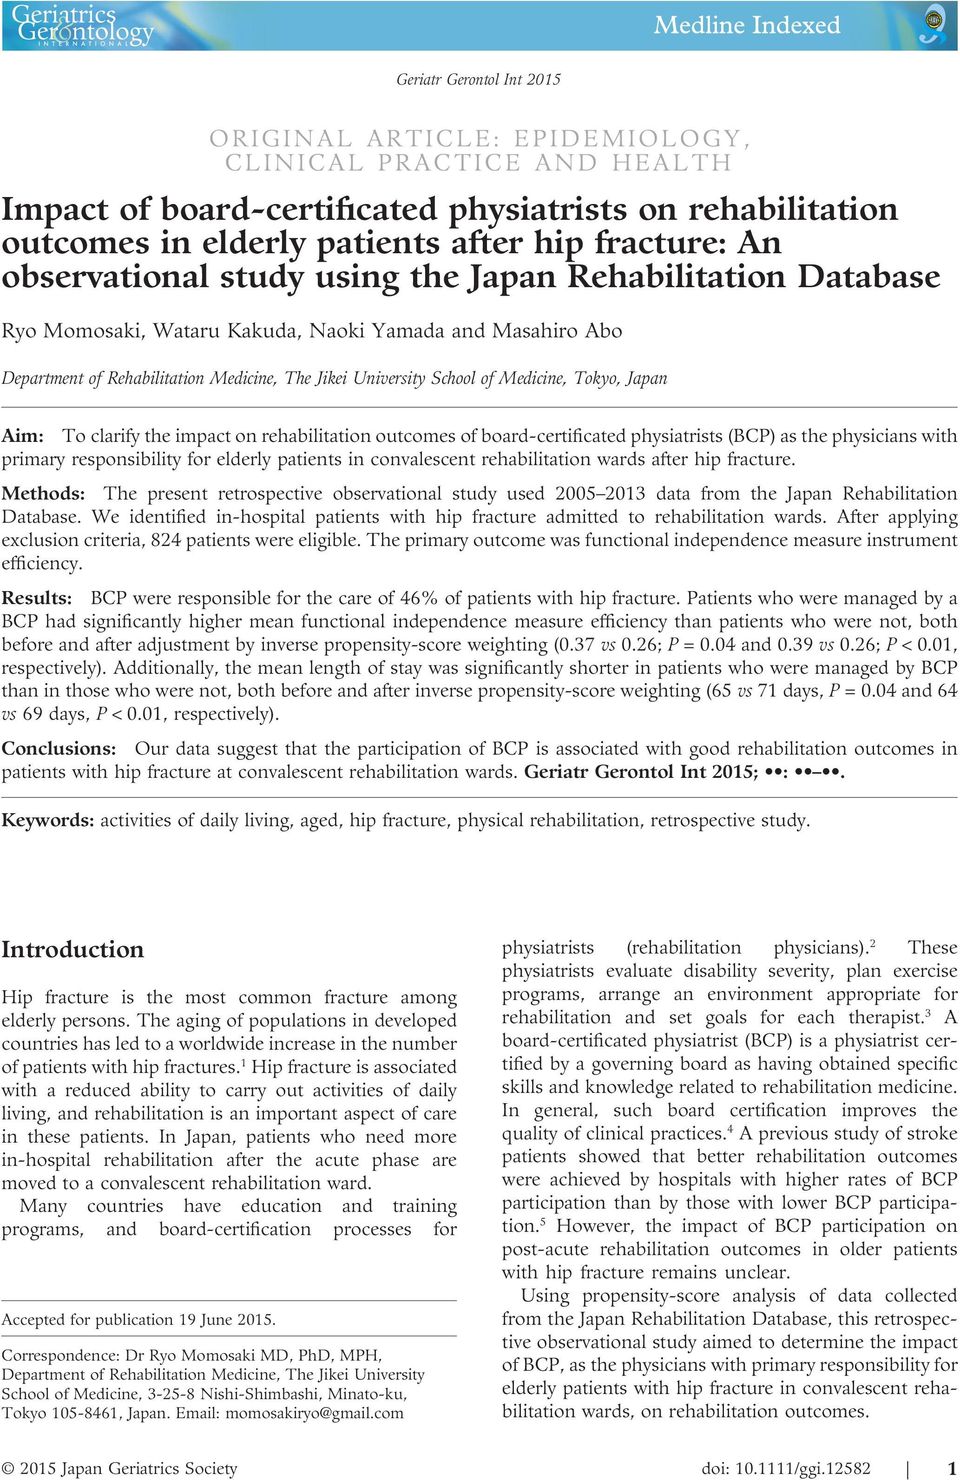 of Medicine, Tokyo, Japan Aim: To clarify the impact on rehabilitation outcomes of board-certificated physiatrists (BCP) as the physicians with primary responsibility for elderly patients in